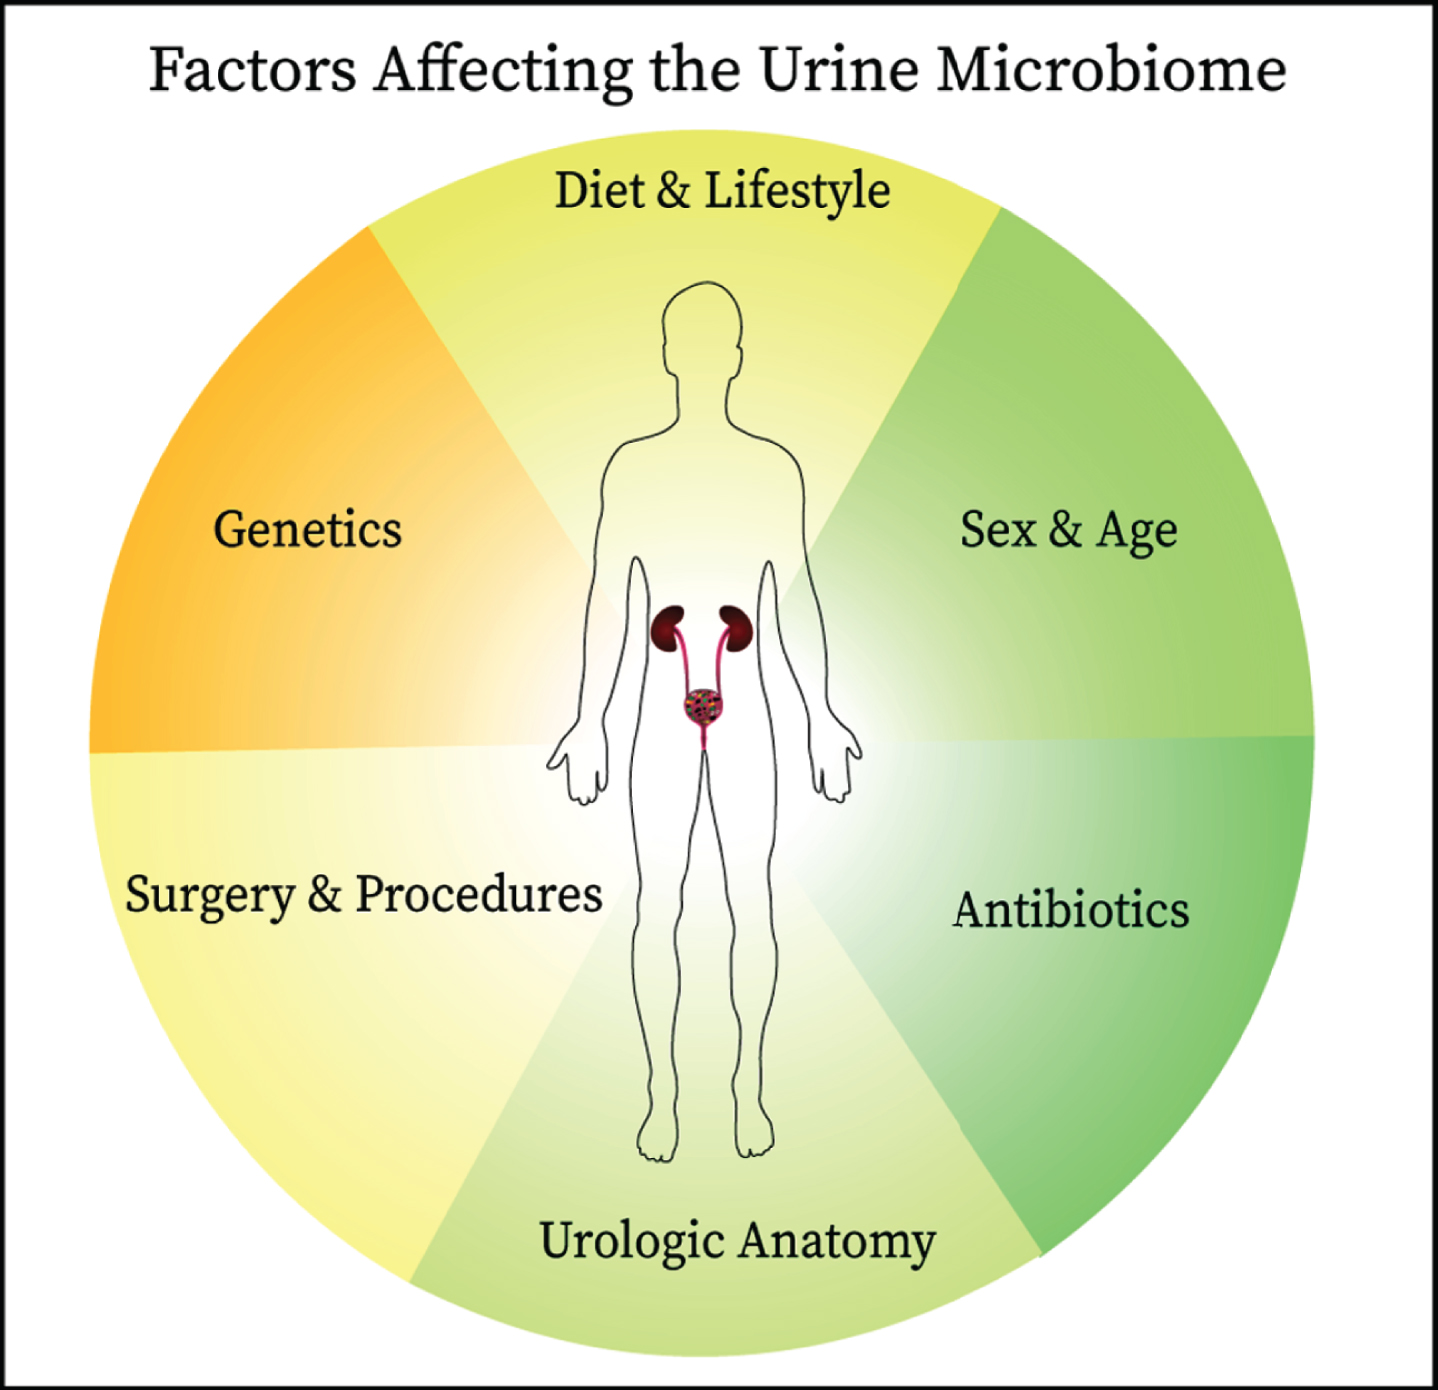 Since the establishment of the presence of commensal microbes in the urinary of healthy individuals, links have been identified between the urine microbiome and bladder cancer oncogenesis and therapeutic responsiveness. The interplay between the urine microbiome and host is complex and affected by other factors including antibiotic use, anatomical structures, surgical manipulation, diet, genetics, and age all are likely to influence the composition of urine microbiome. These factors should be considered when designing studies on the urine microbiome.